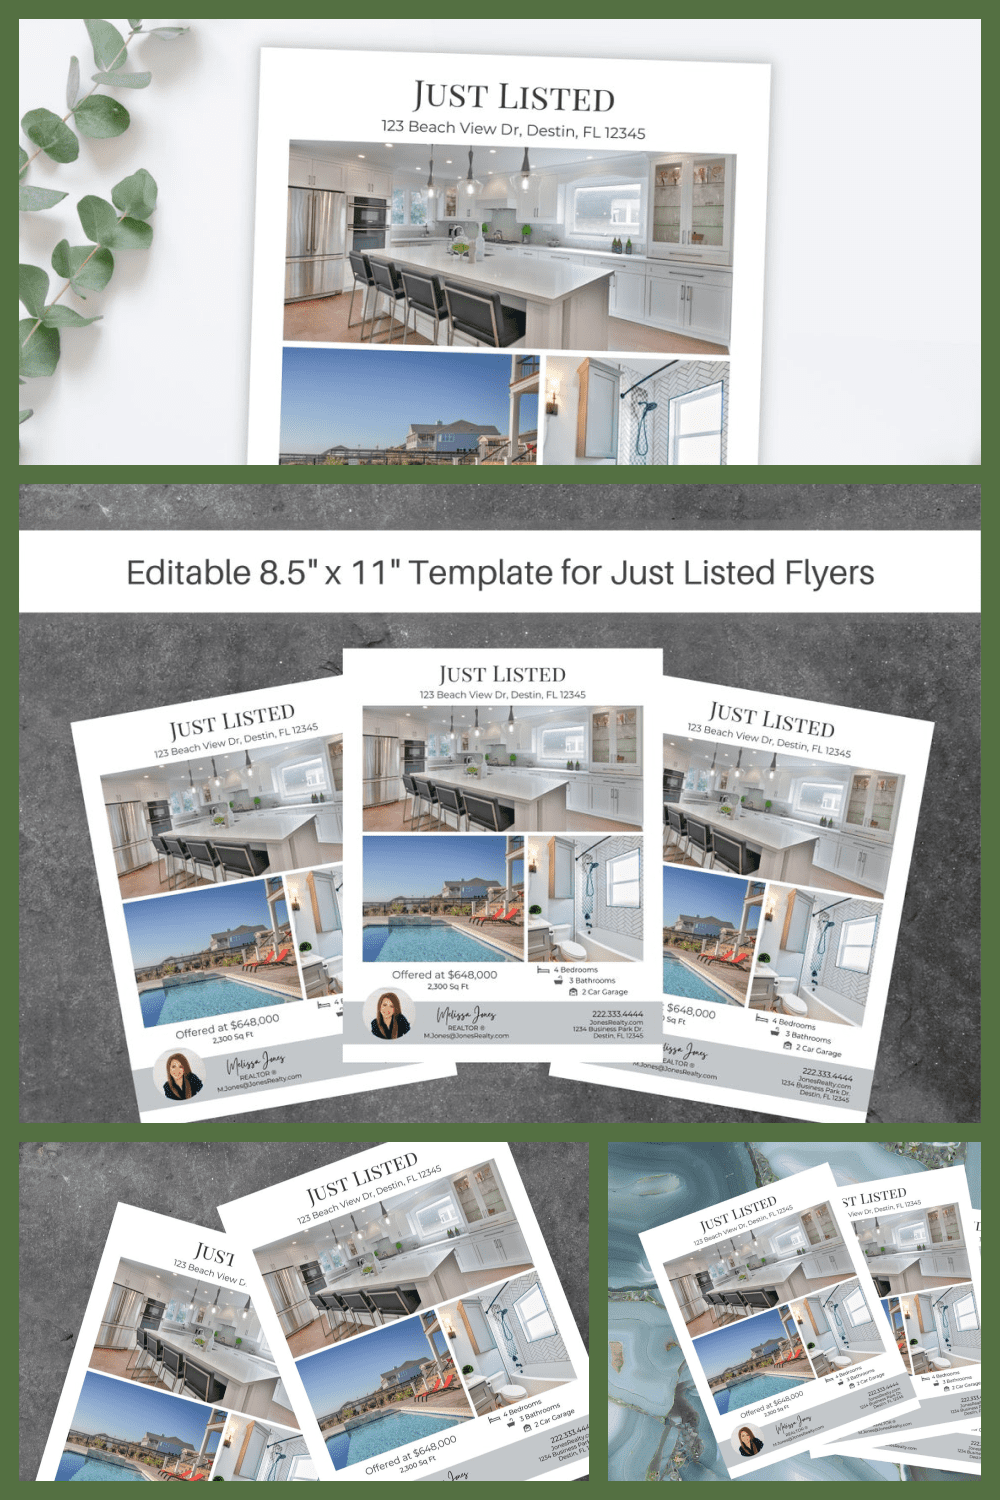 Create stunning new listing Real Estate Flyers in minutes using this pre-made template.